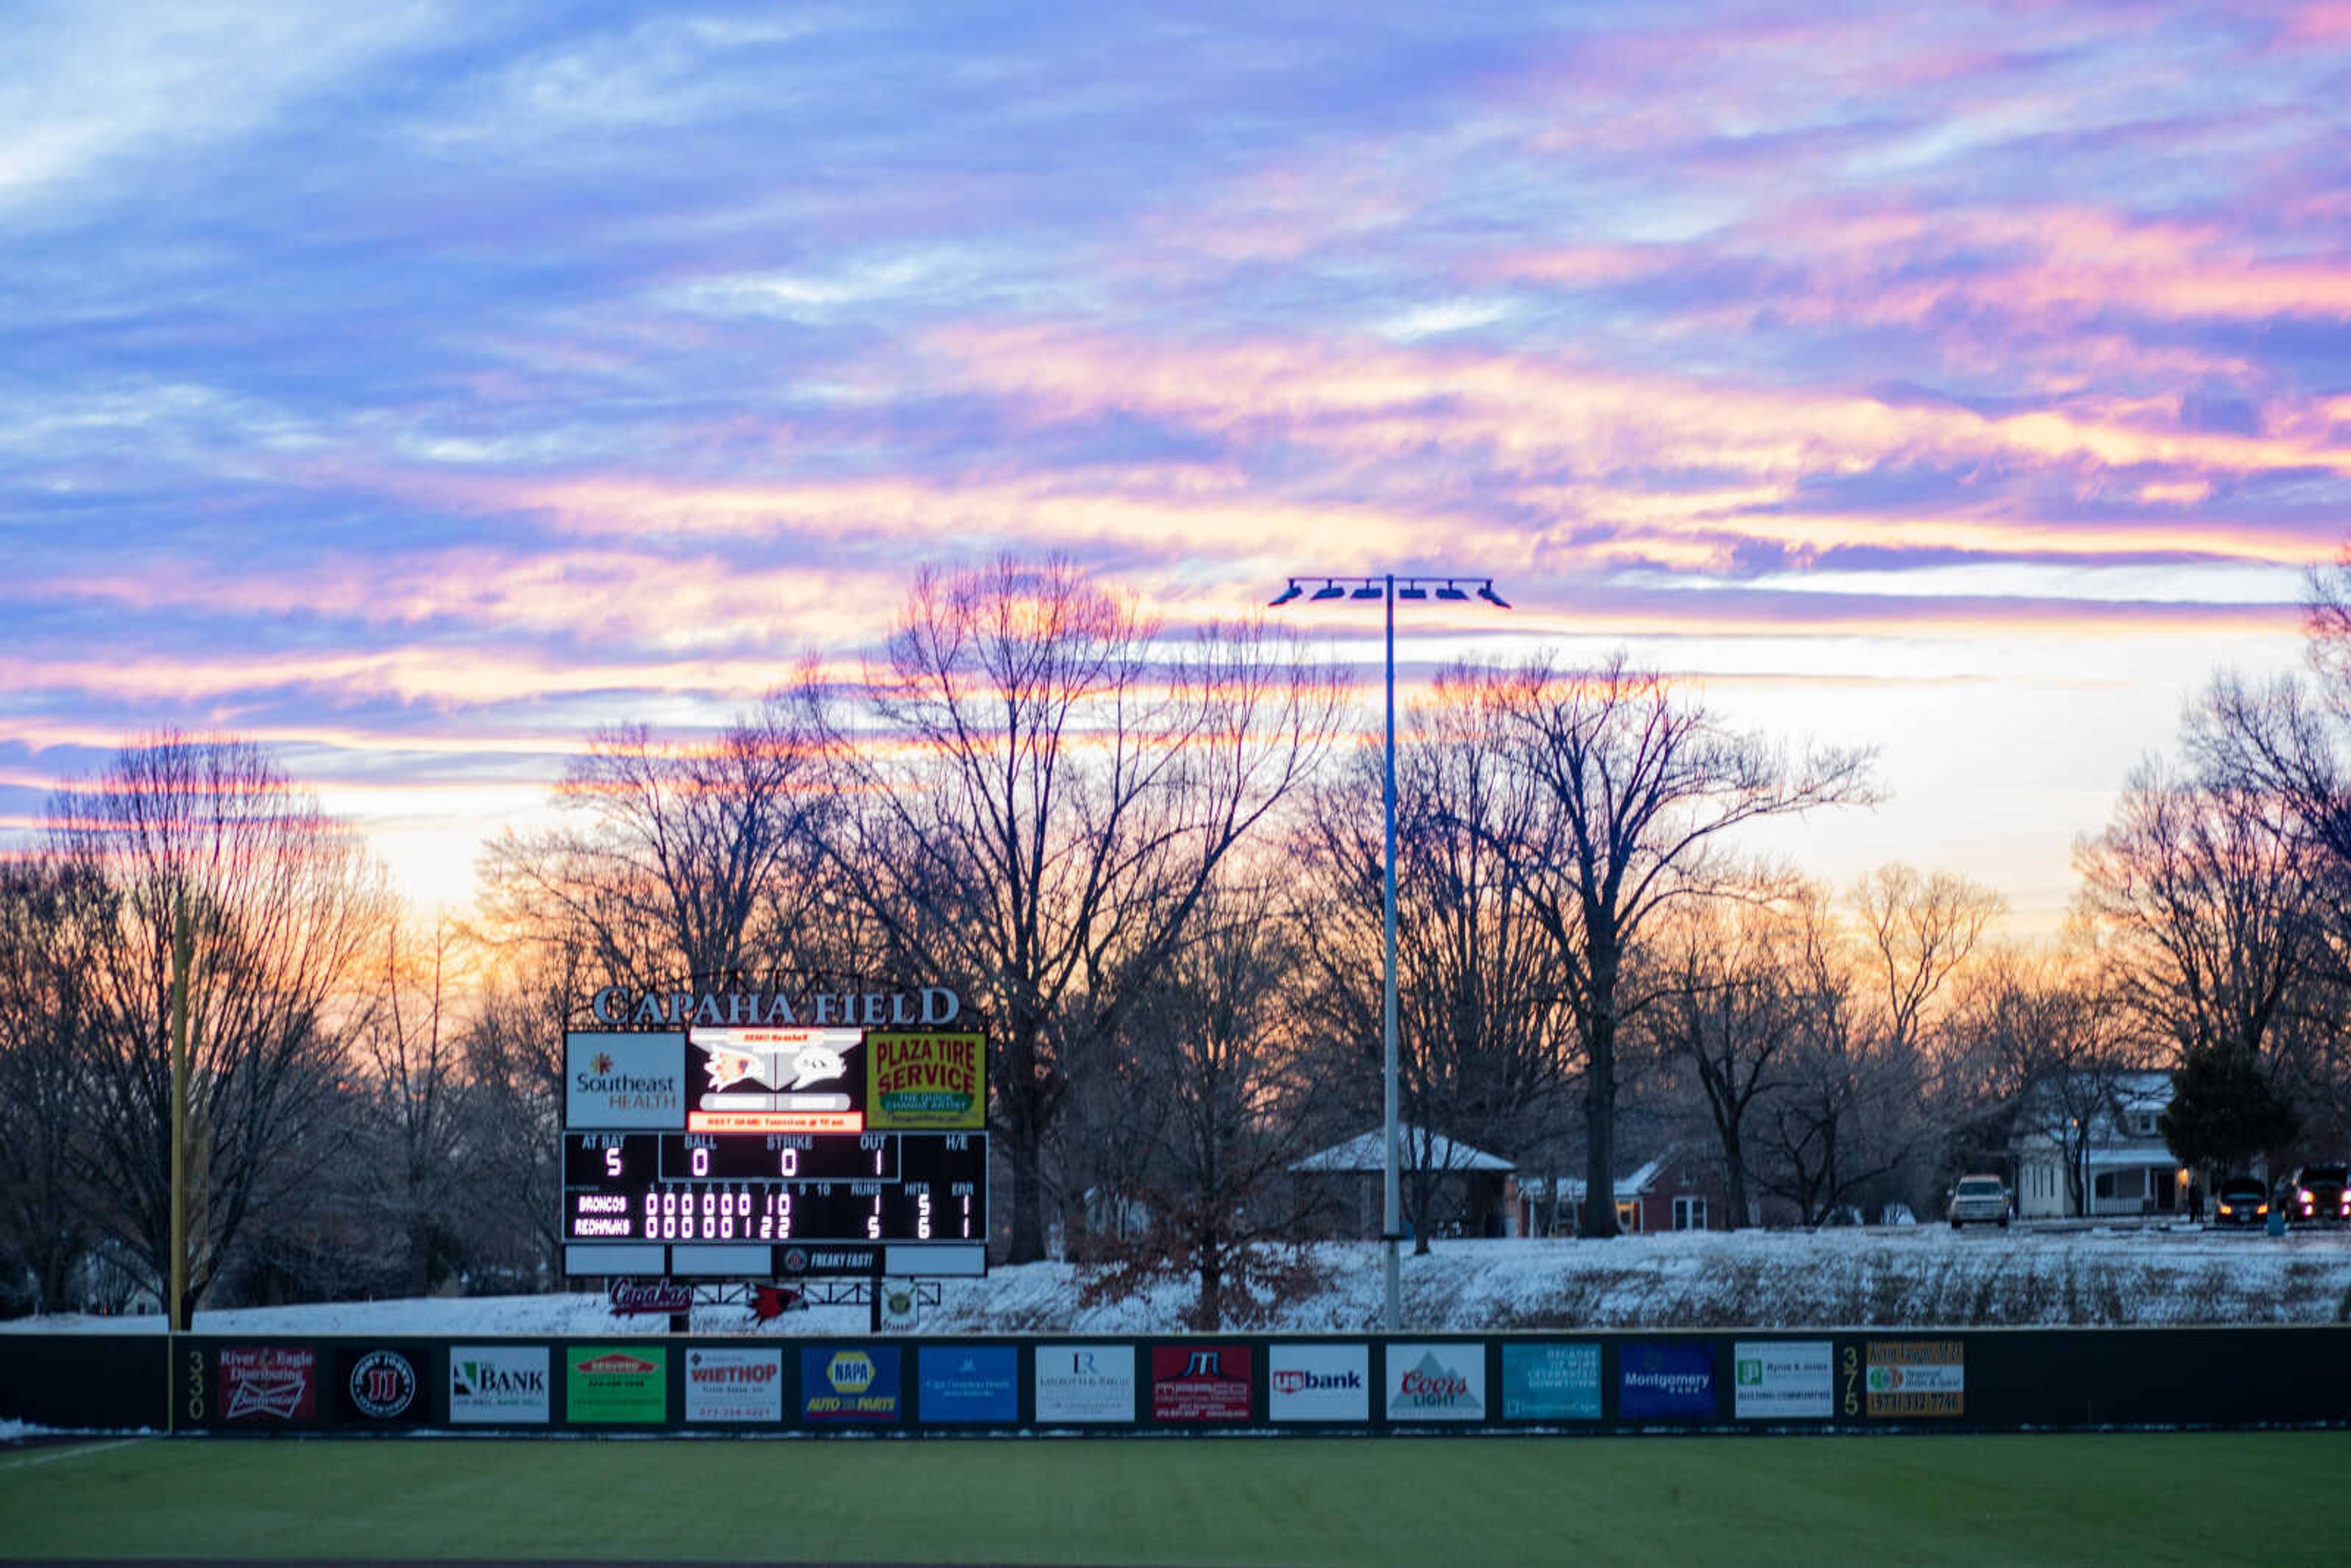 The Redhawks opener was postponed on Saturday, Feb. 16, in the eighth inning due to darkness, and resumed play on Sunday, where Southeast swept Western Michigan.